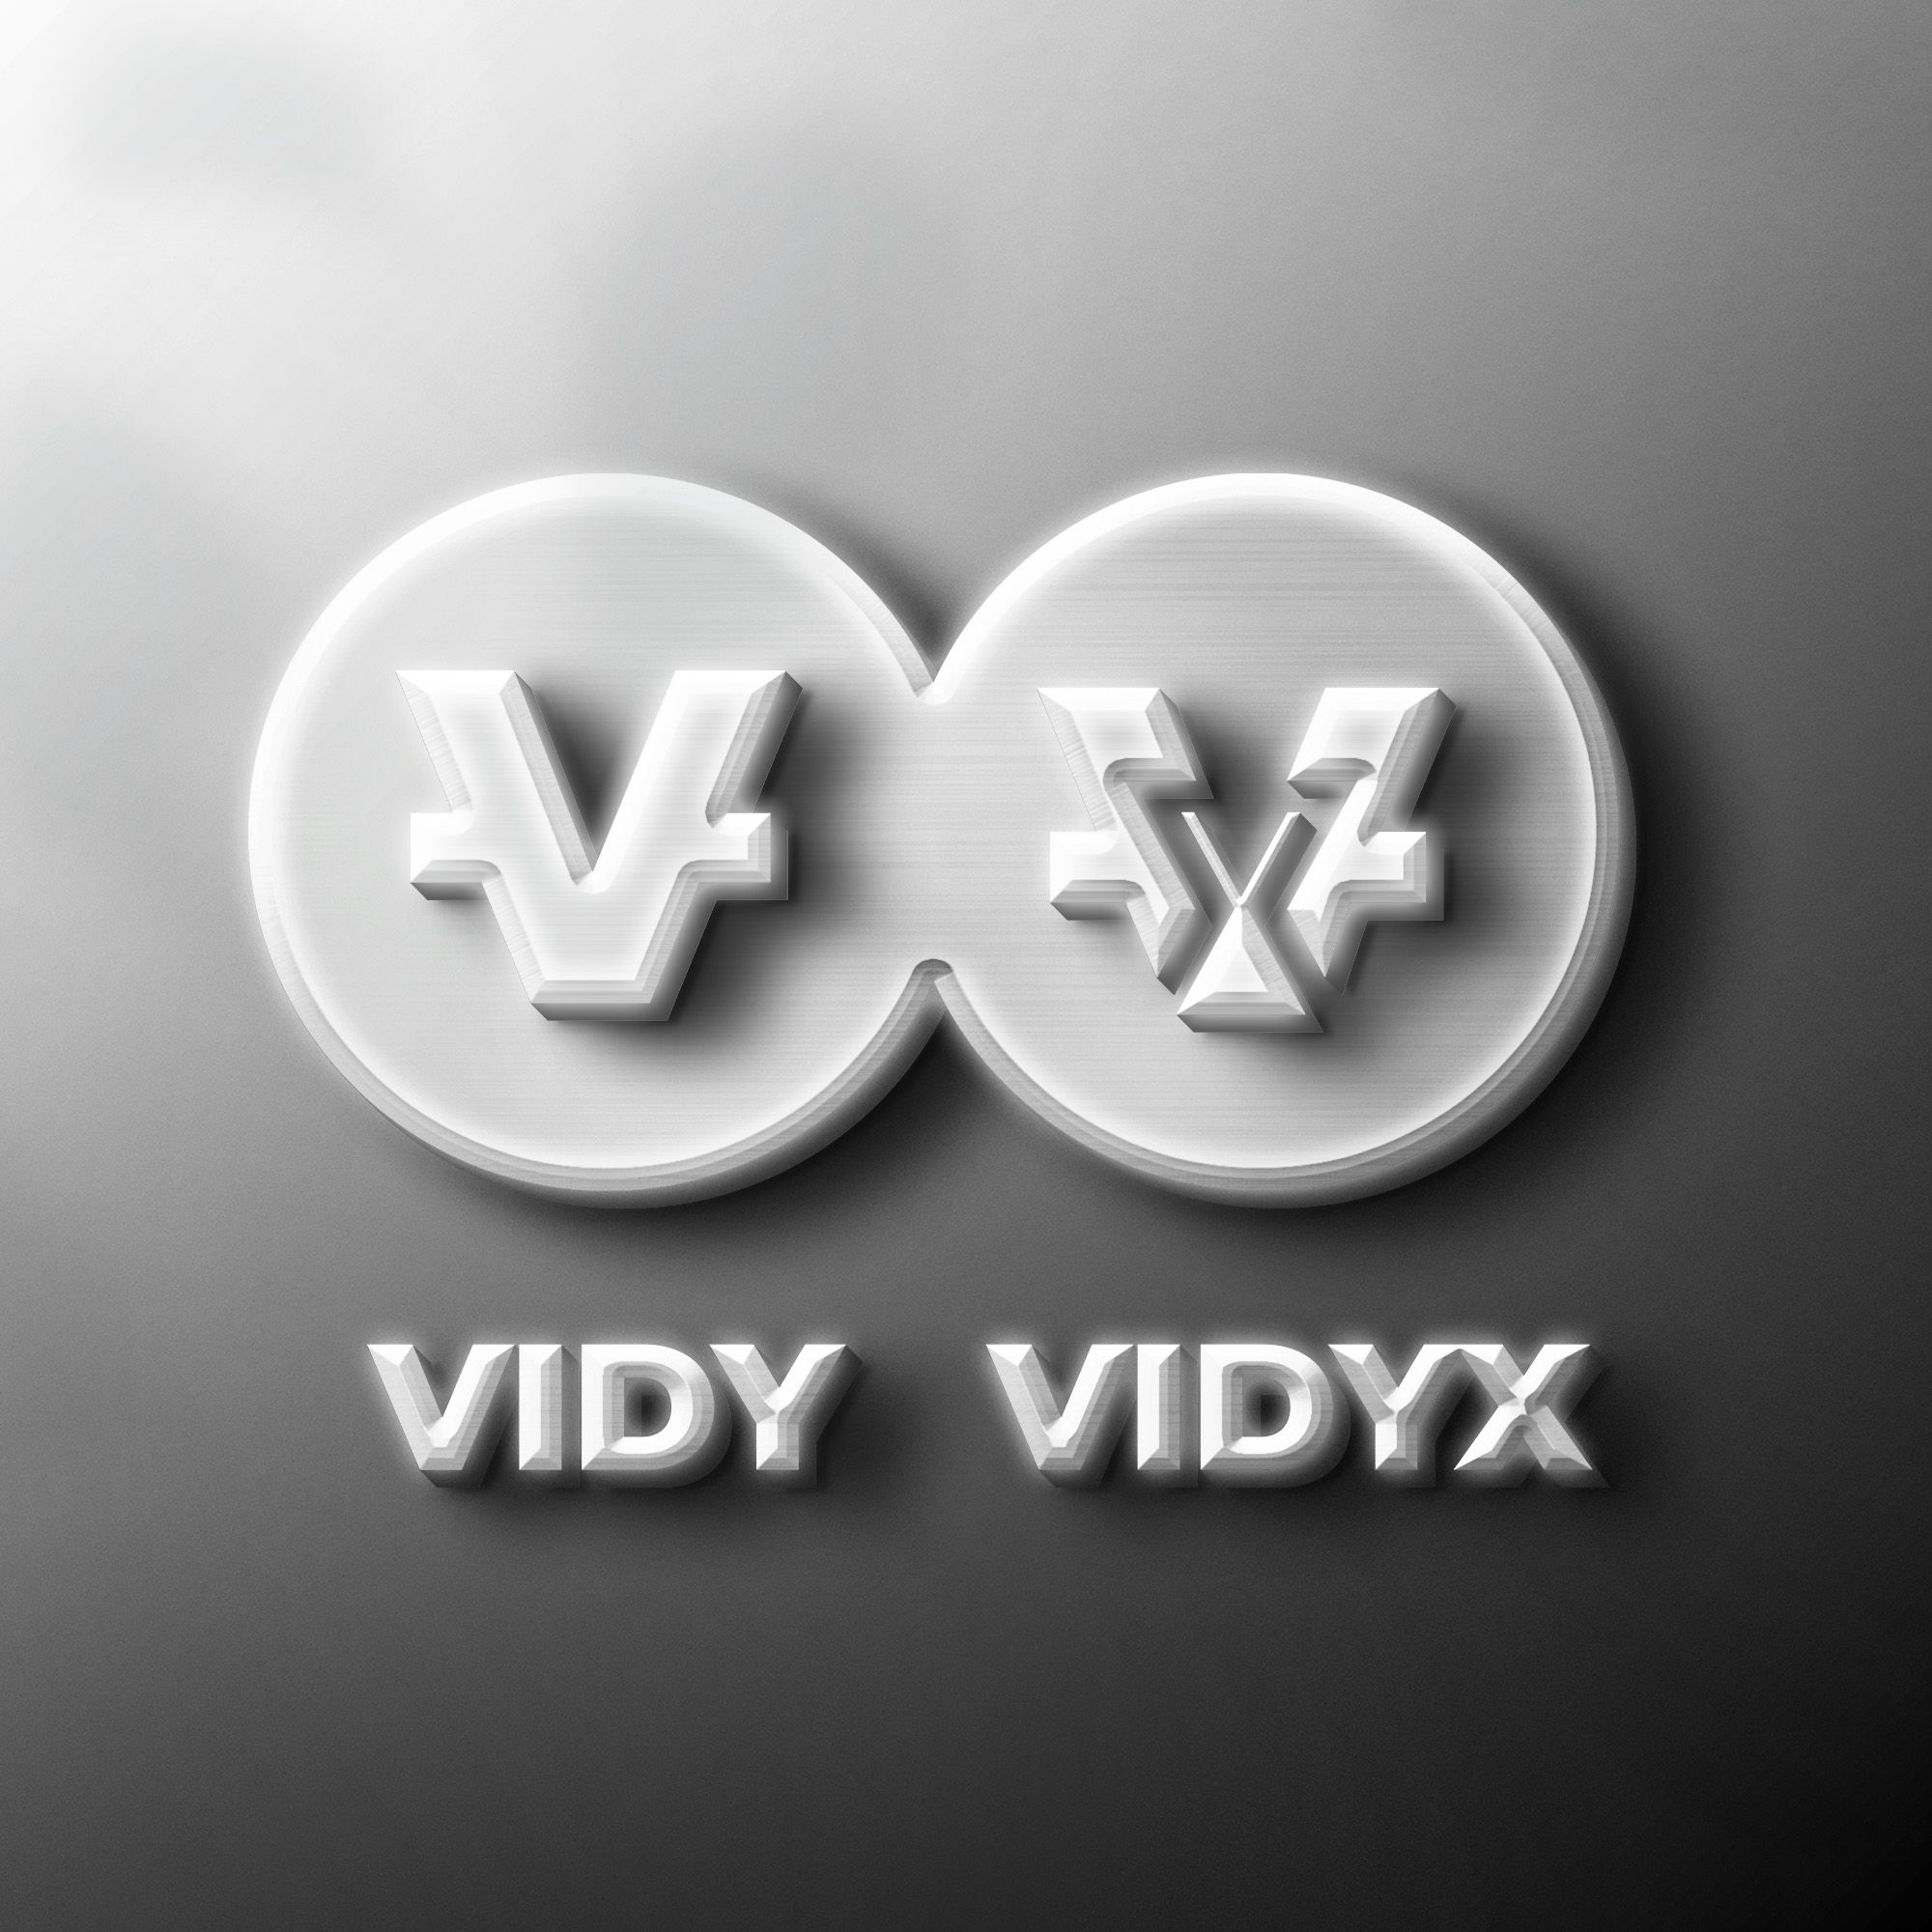 VIDY - VIDYX - Best Cryptocurrencies To Invest with speed of growth has intrigued many projects and partners.